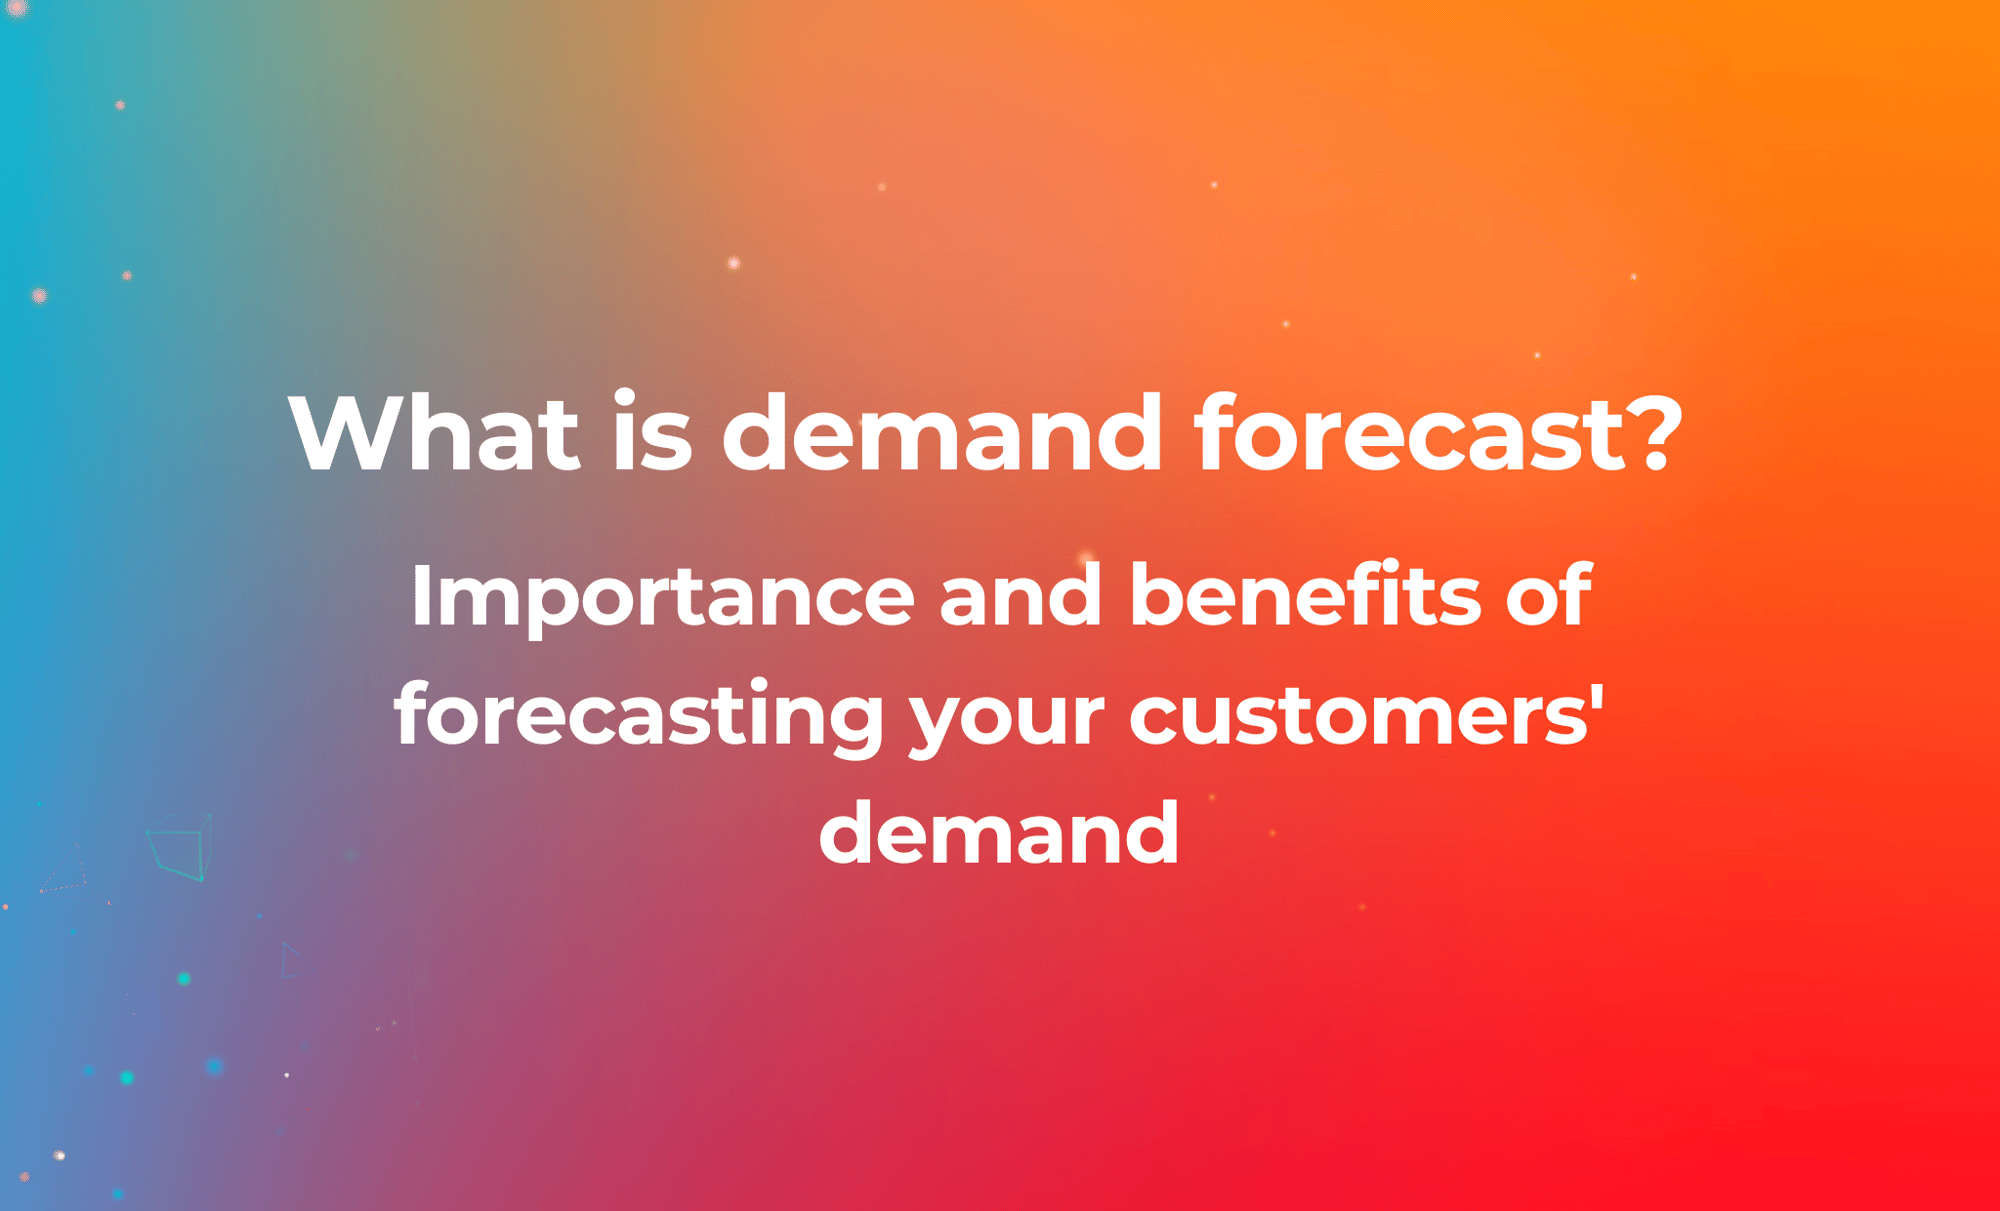 Importance and benefits of forecasting your customers demand